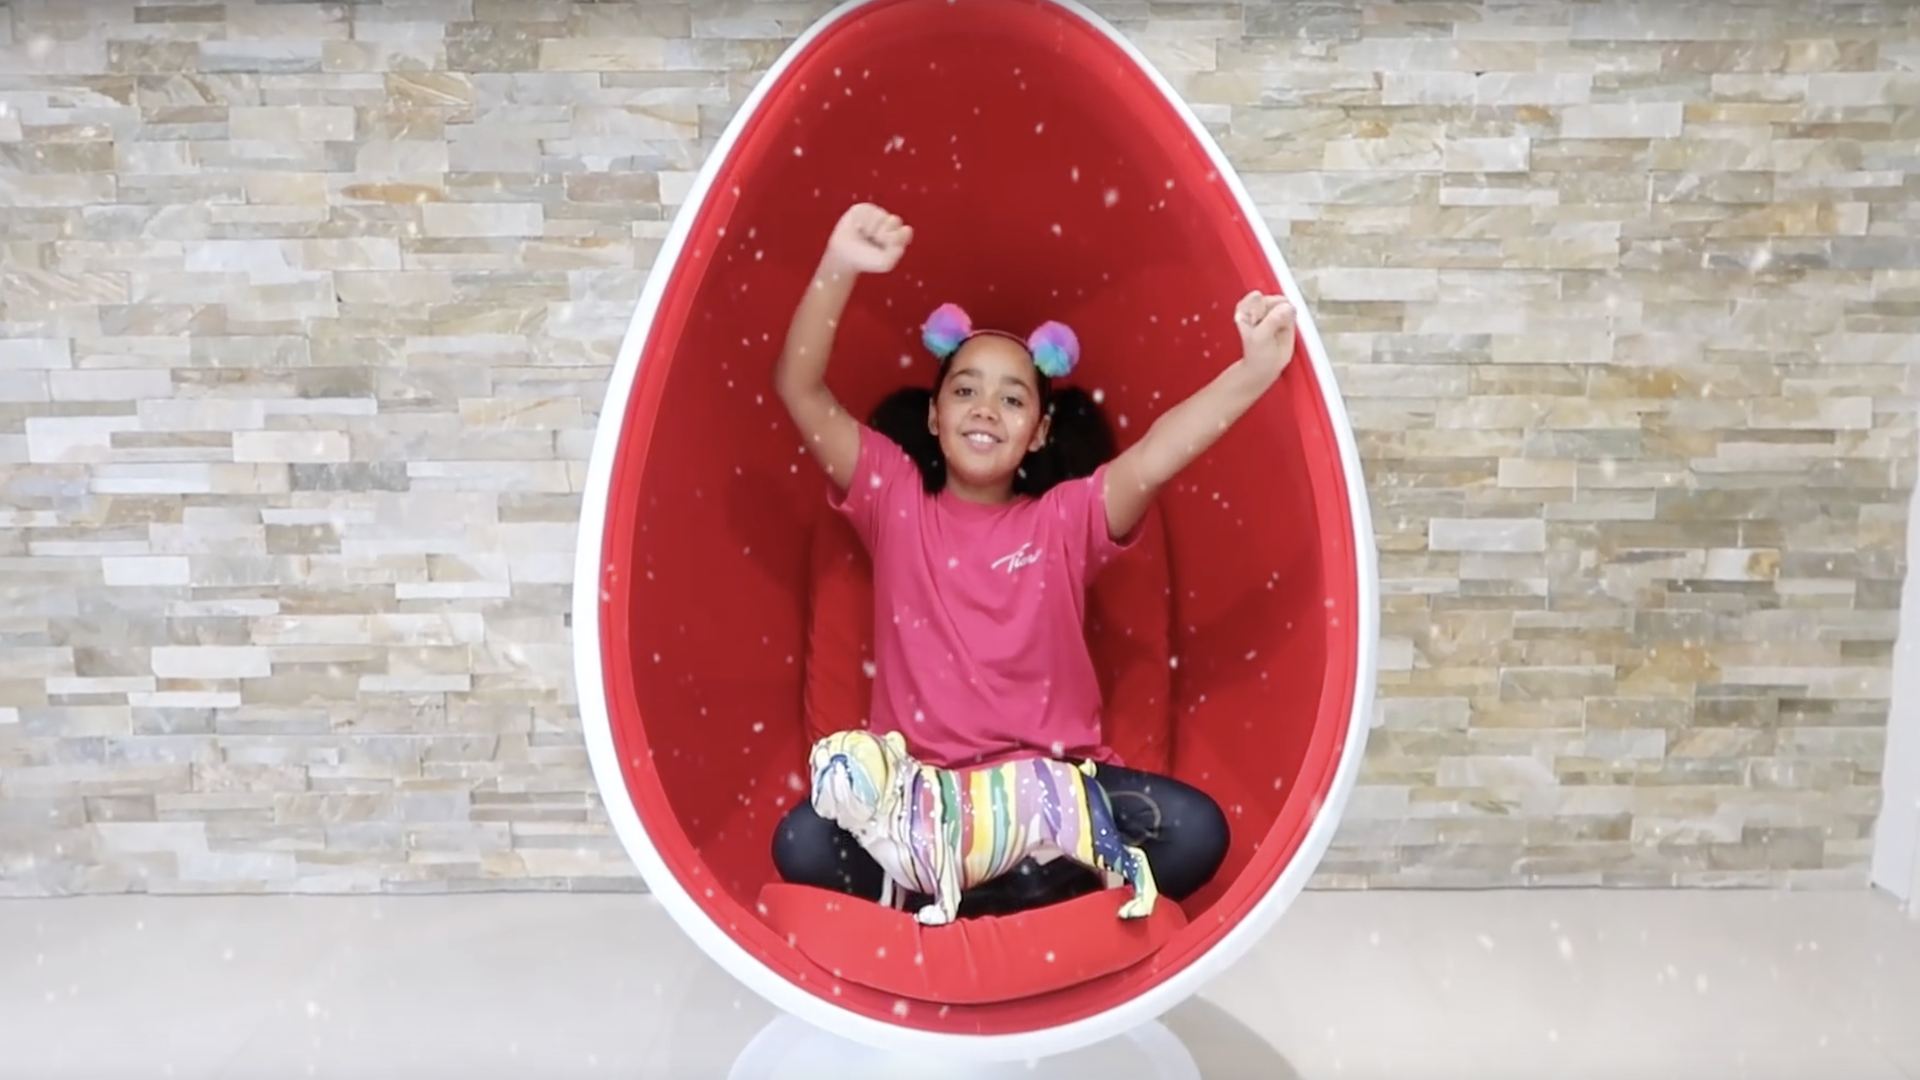 Tiana Wilson sits in a big red egg 